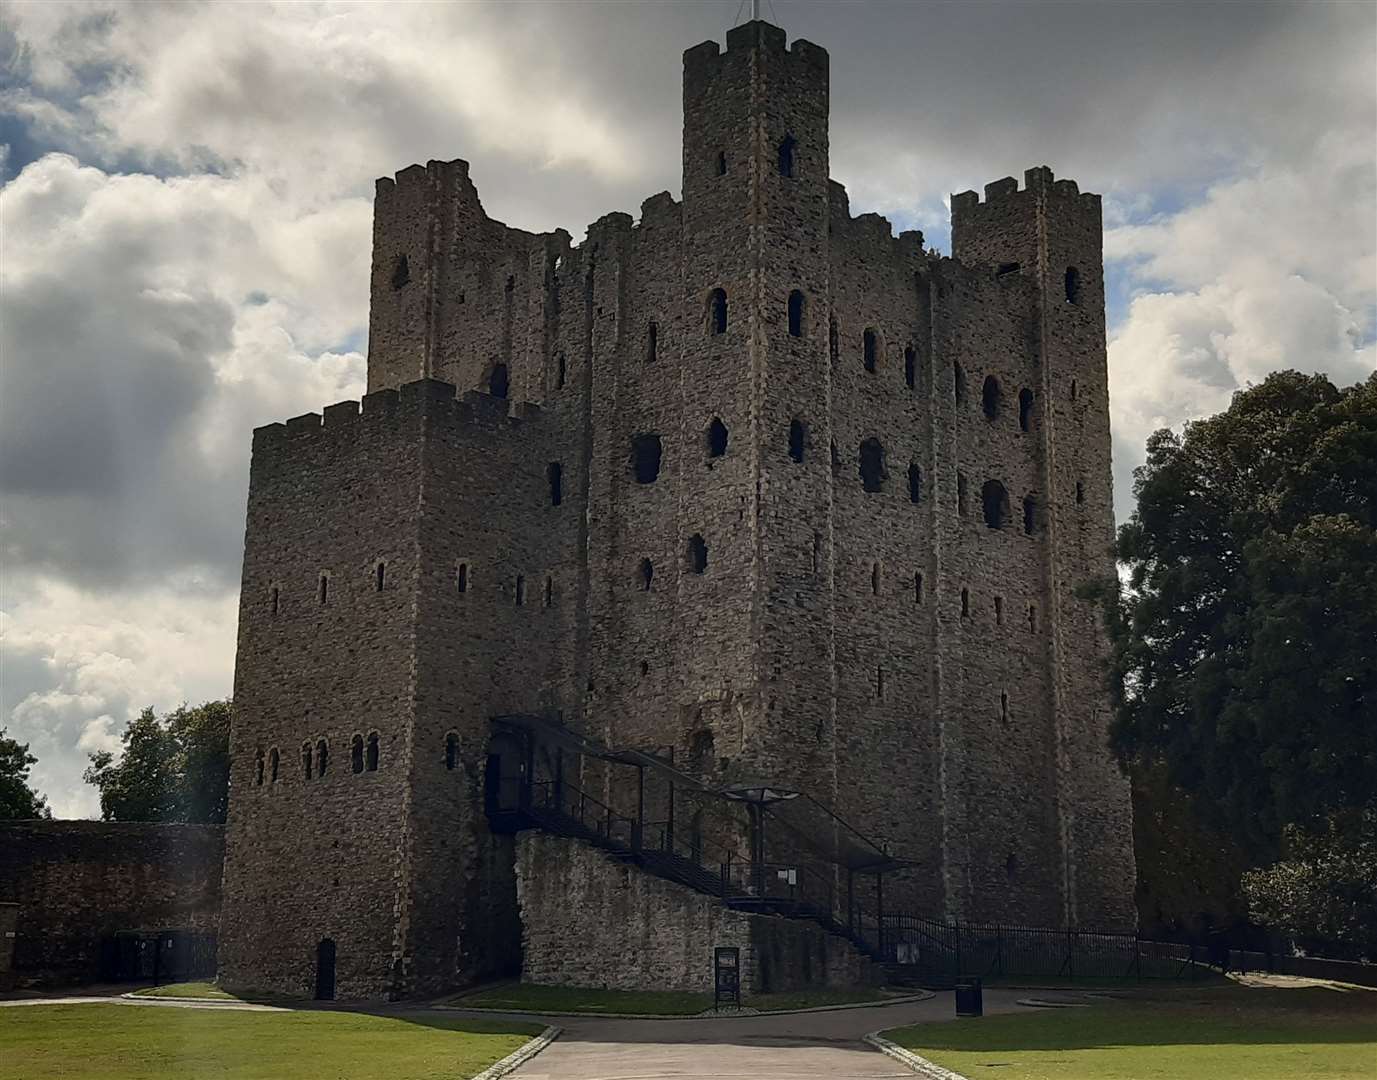 Visit one of Kent's castles with your kids. Photo: Sean Delaney